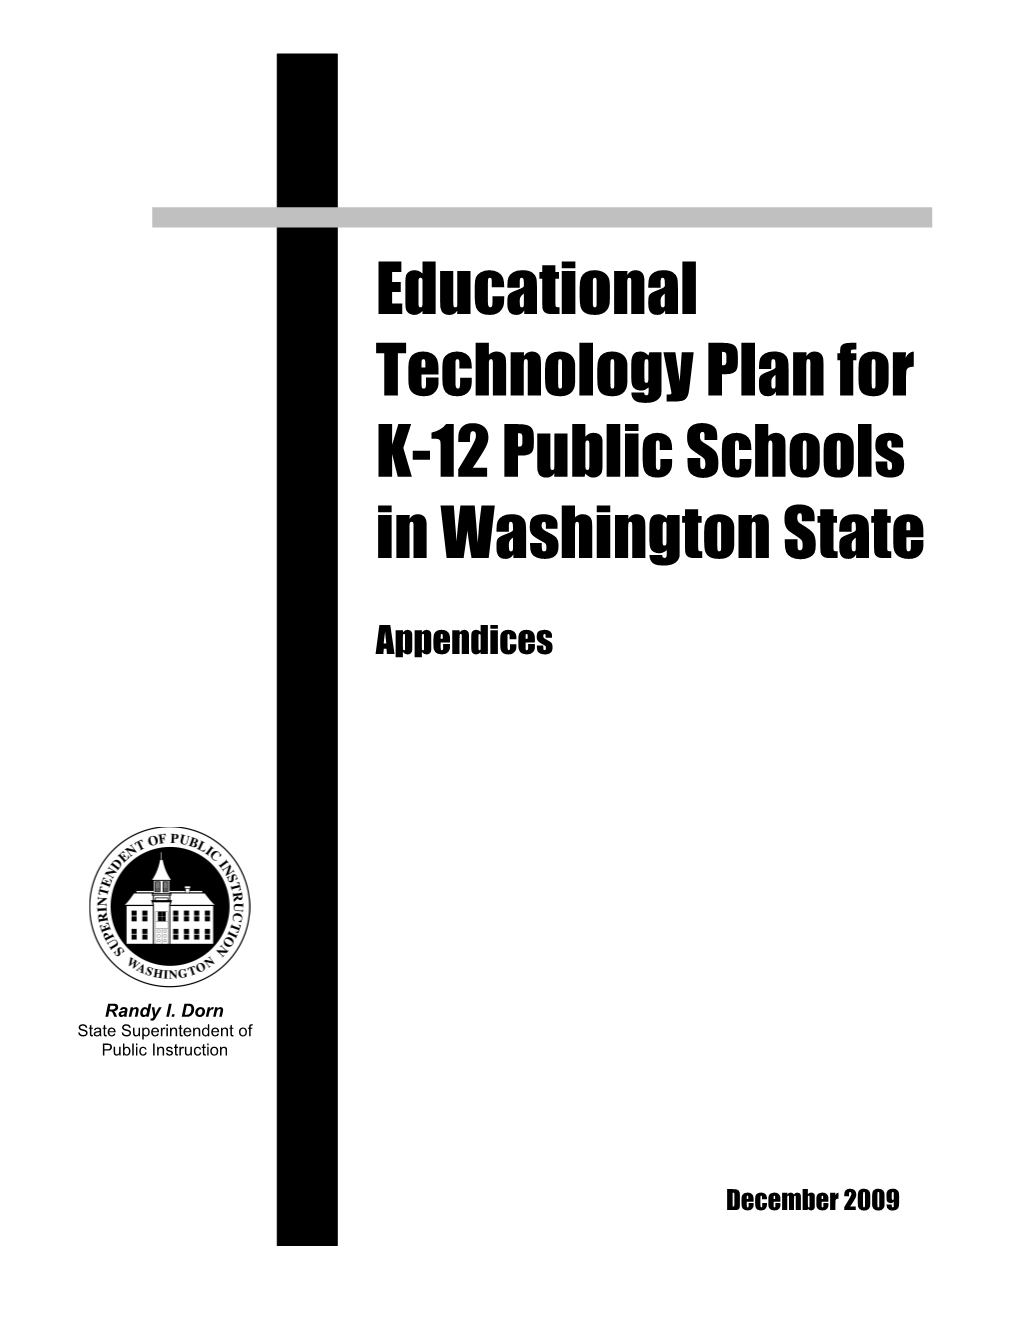 Educational Technology Plan for K-12 Public Schools in Washington State